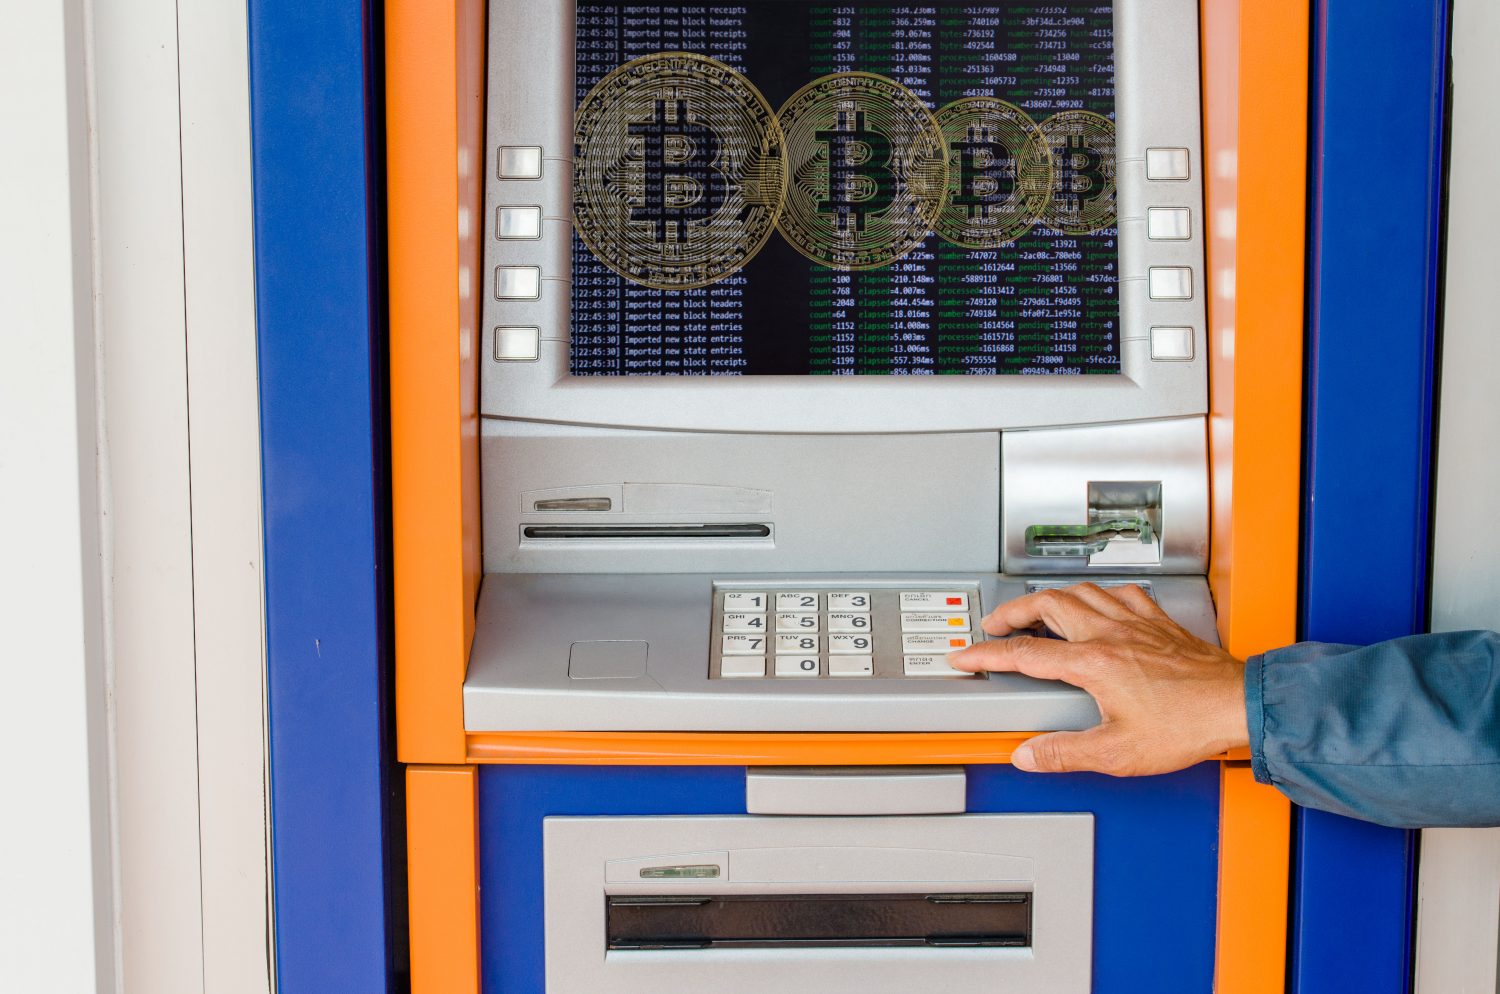 Vancouver Saw The First-Ever Bitcoin ATM. Now Its Mayor Wants To Ban Them